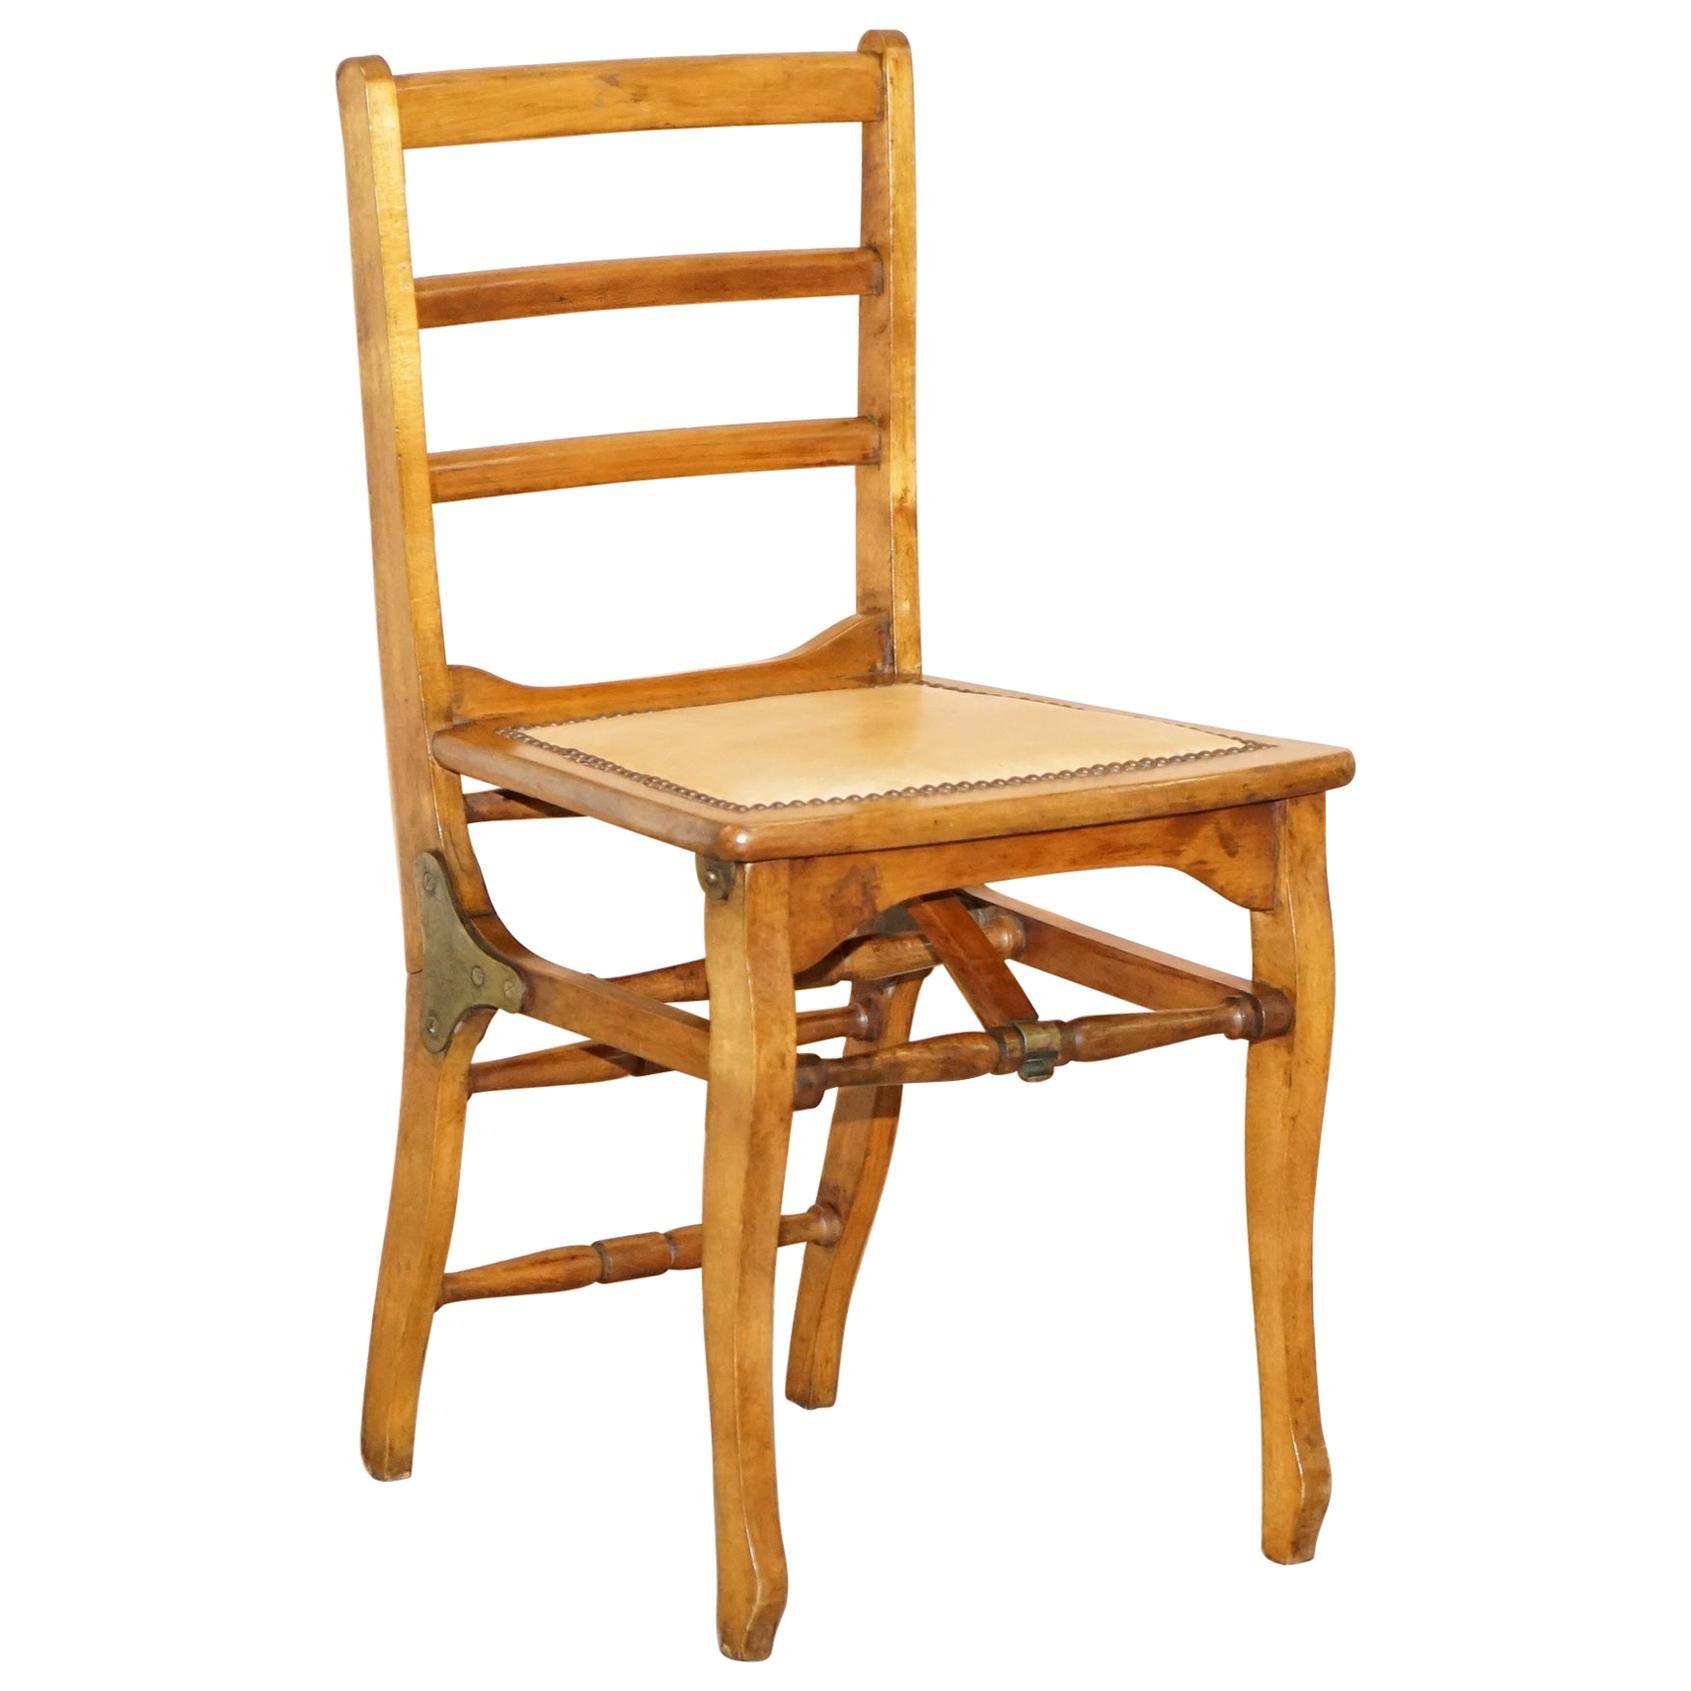 Rare circa 1890 Solid Fruitwood Brass Fitting Military Campaign Folding Chair For Sale